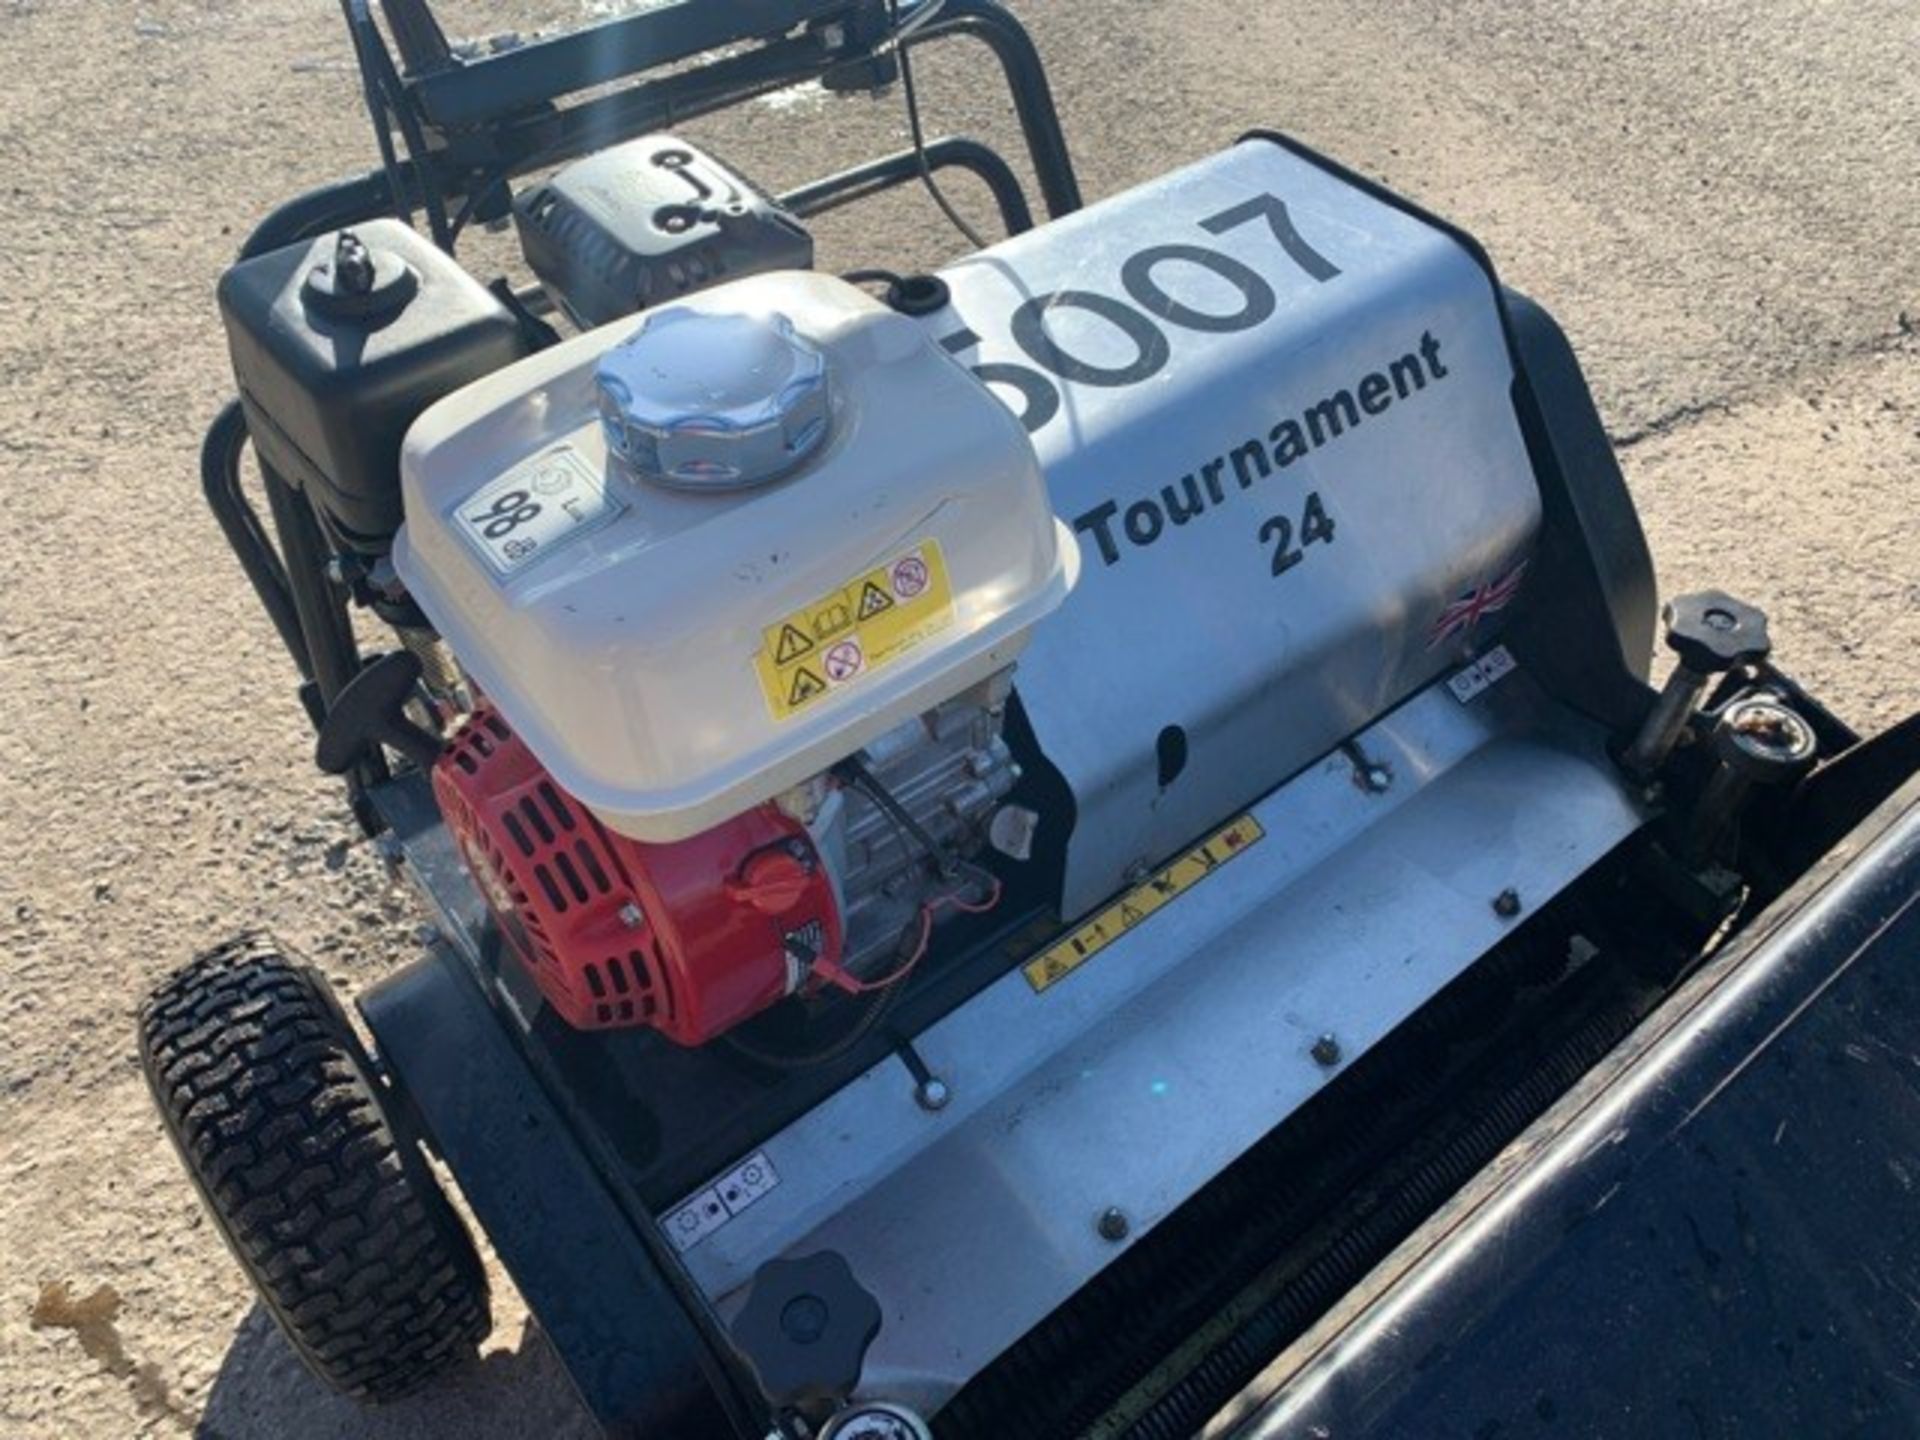 Allet Tournament 24 petrol driven cylinder mower Year: 2014 S/N: 14-308 - Image 8 of 12